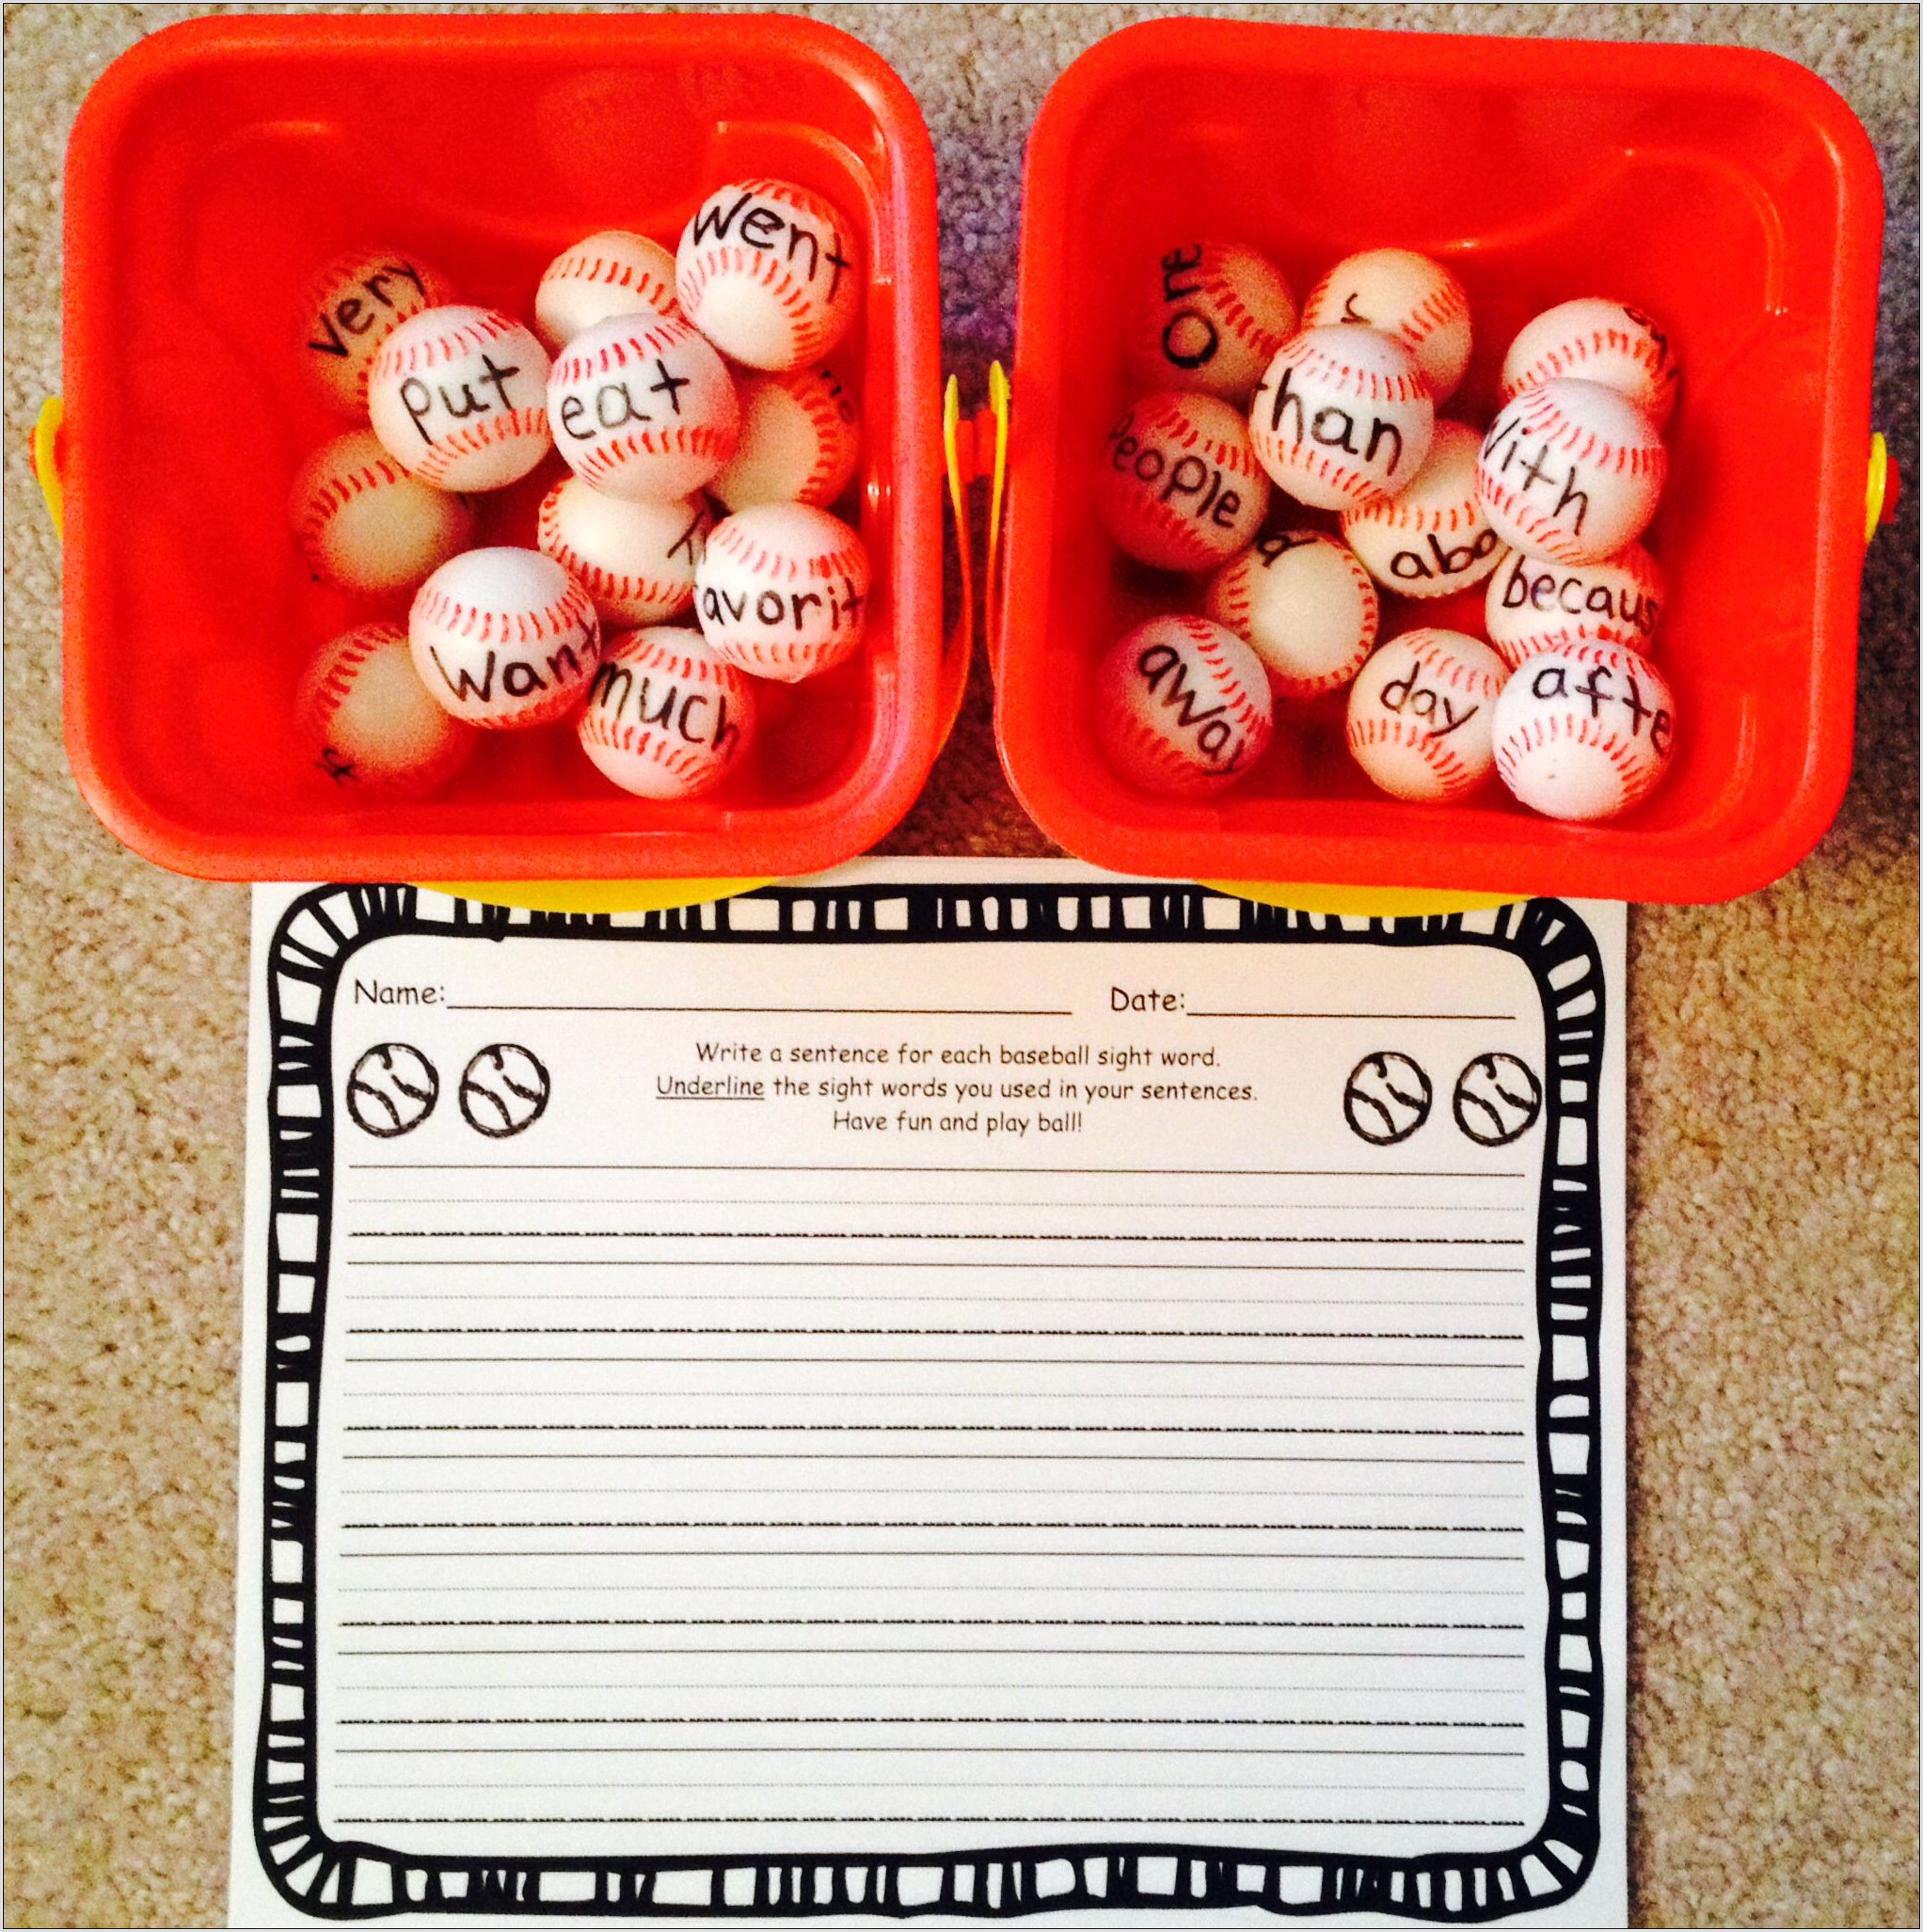 Worksheet With Sight Words